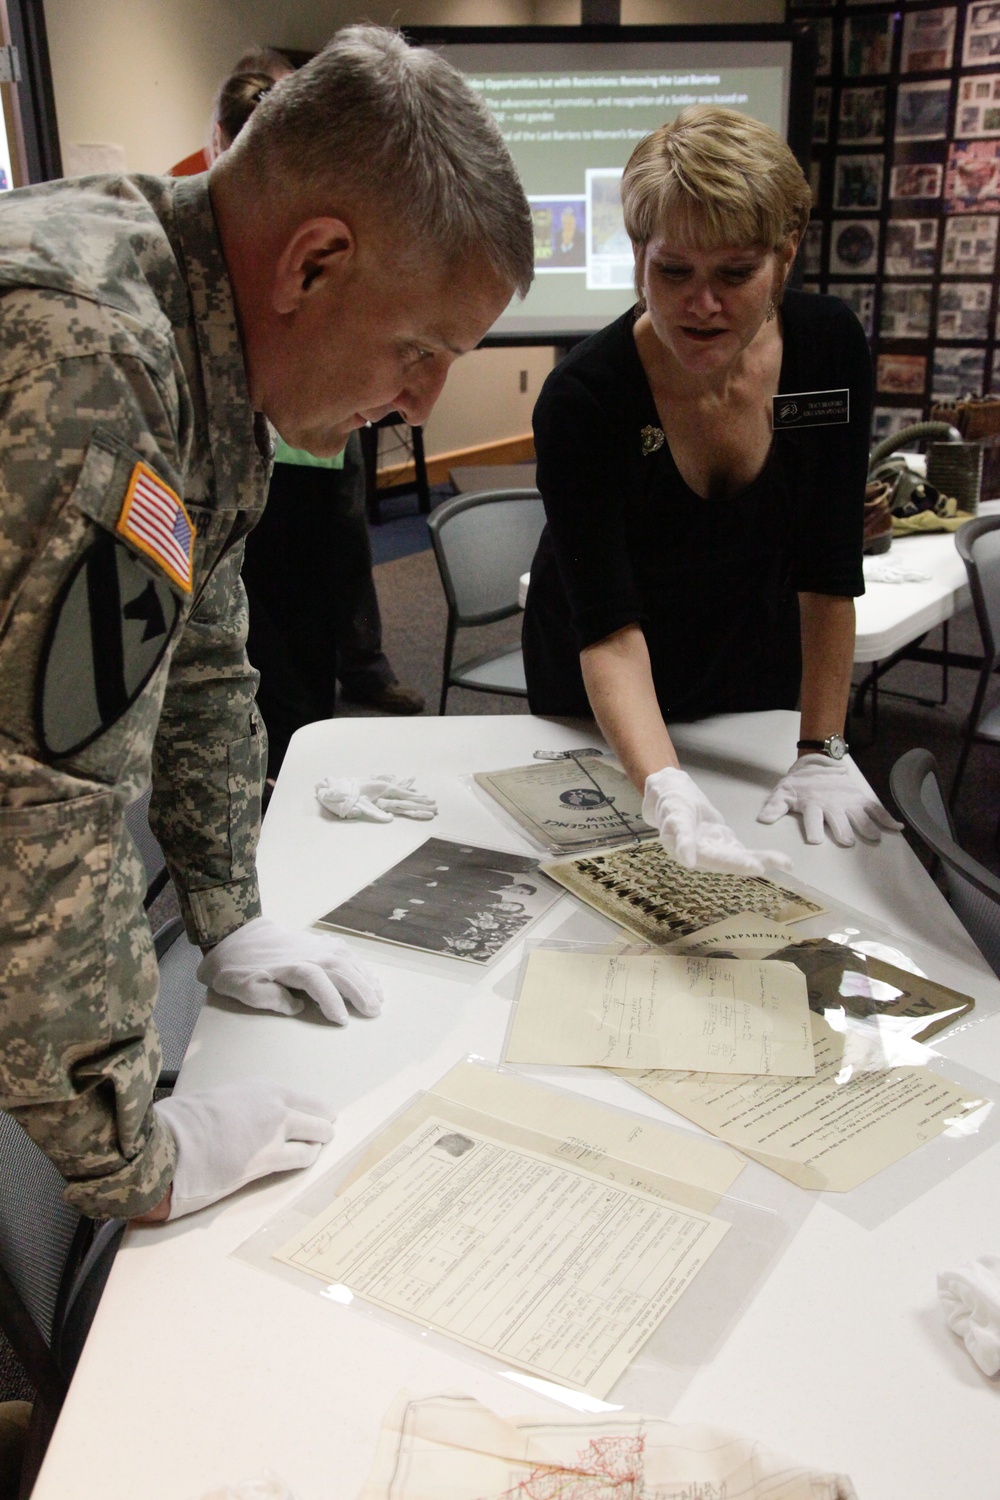 Sergeant Major of the Army Chandler visits US Army women's museum